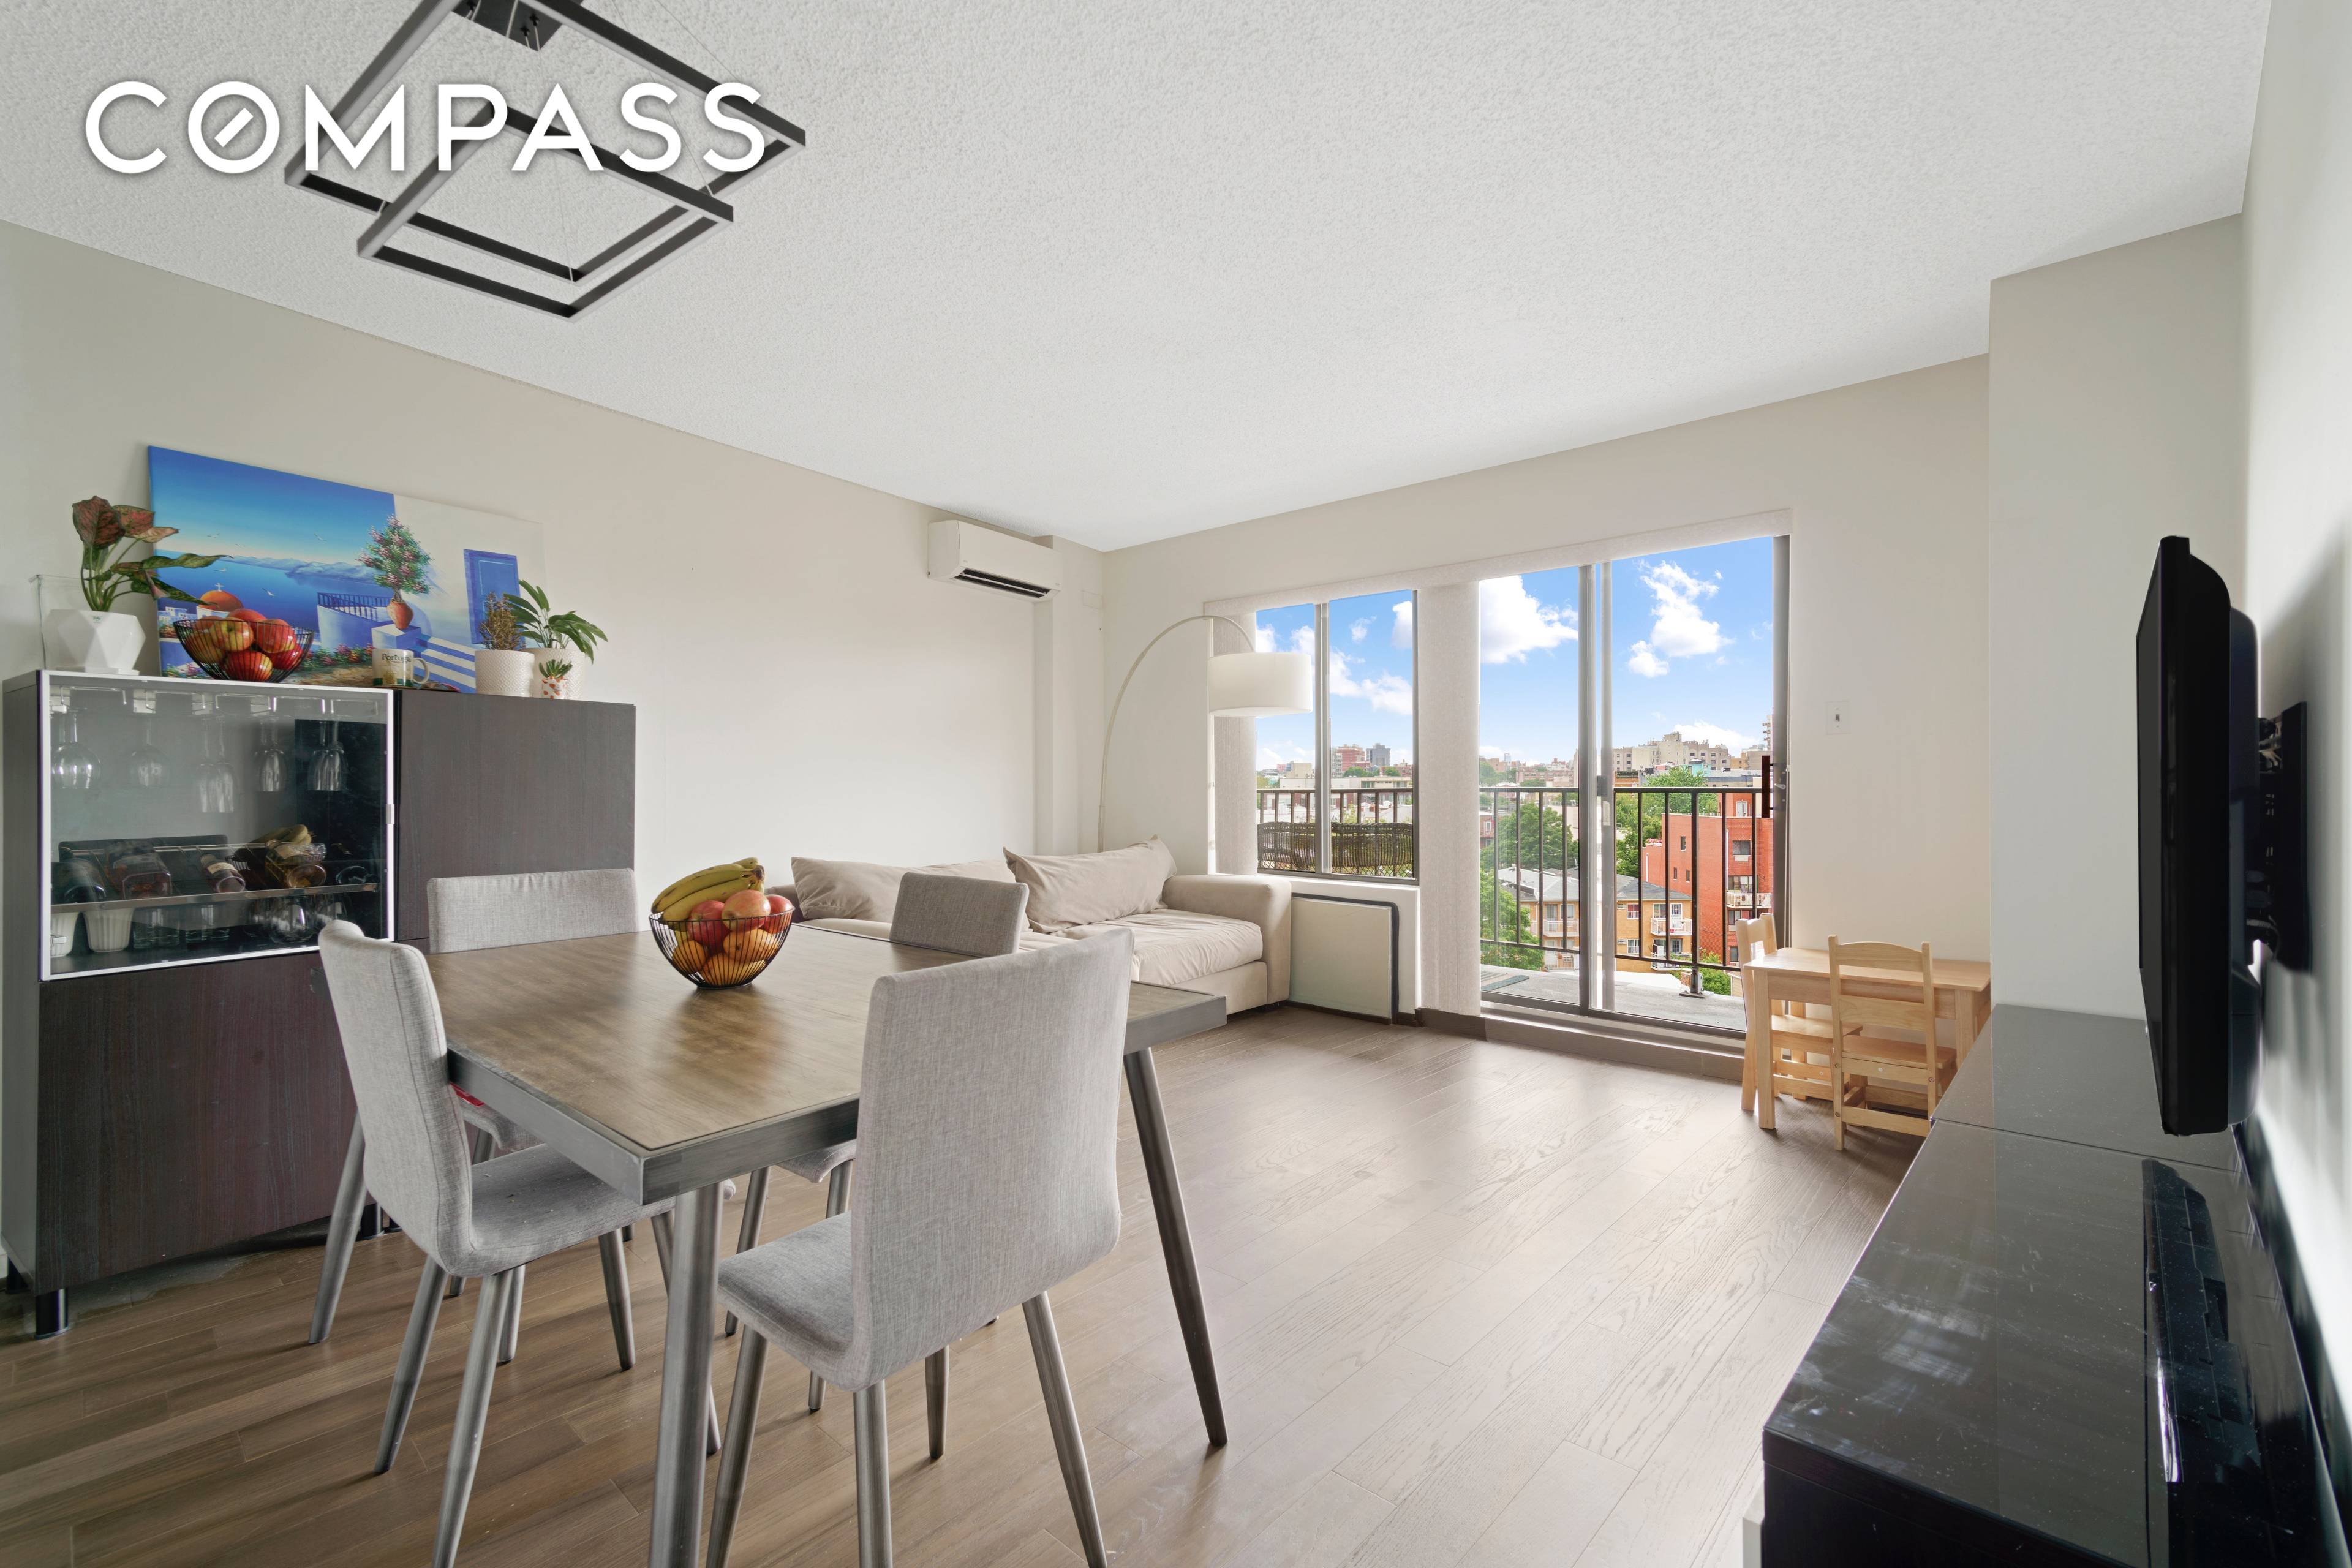 Welcome to this meticulously renovated and well appointed 2 bed, 2 bath apartment located in Shore Towers Condominium.